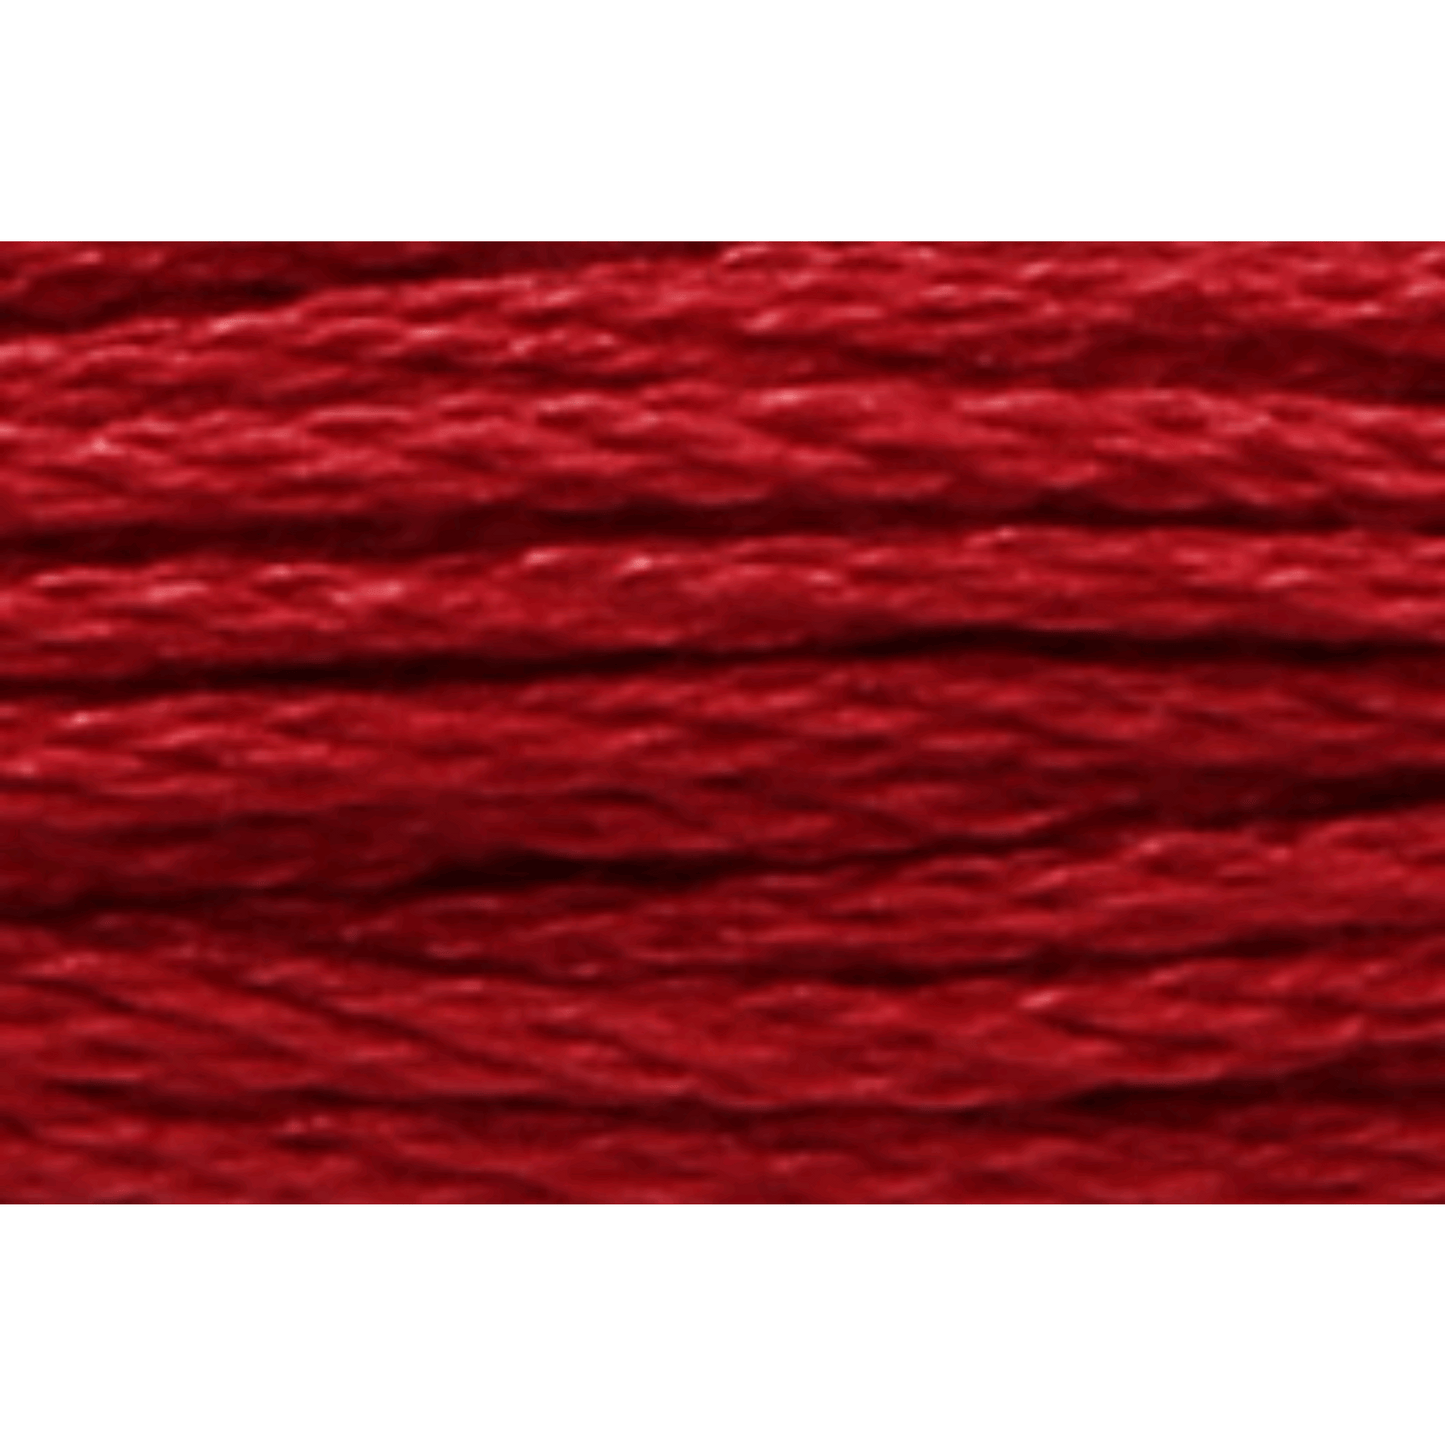 Anchor embroidery thread, 2g, colour 20 wine red